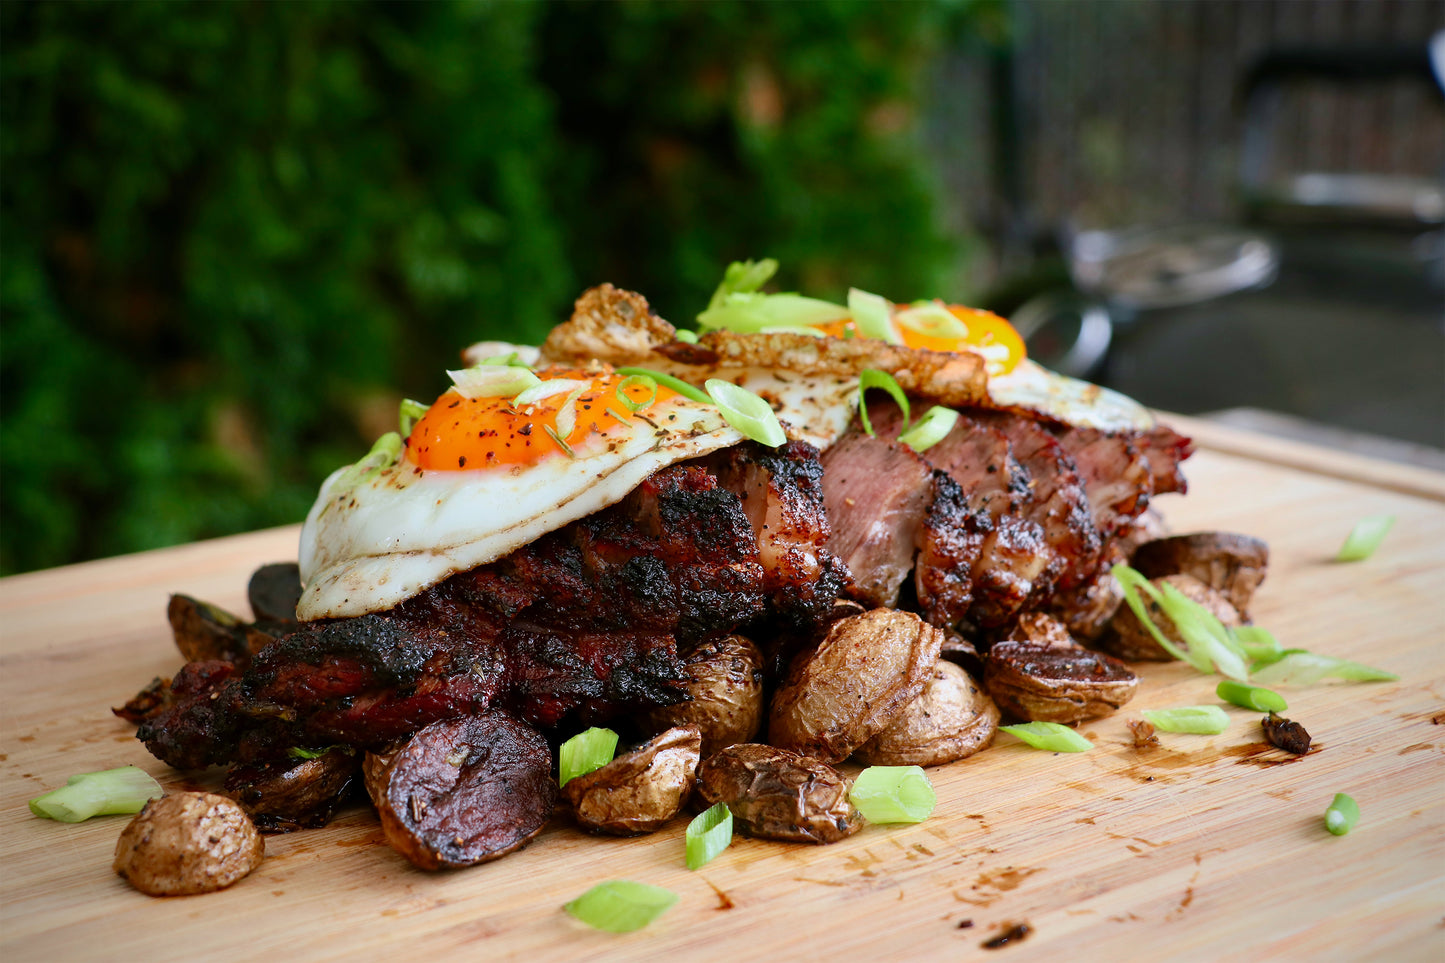 Steak And Eggs for Breakfast on the Grill